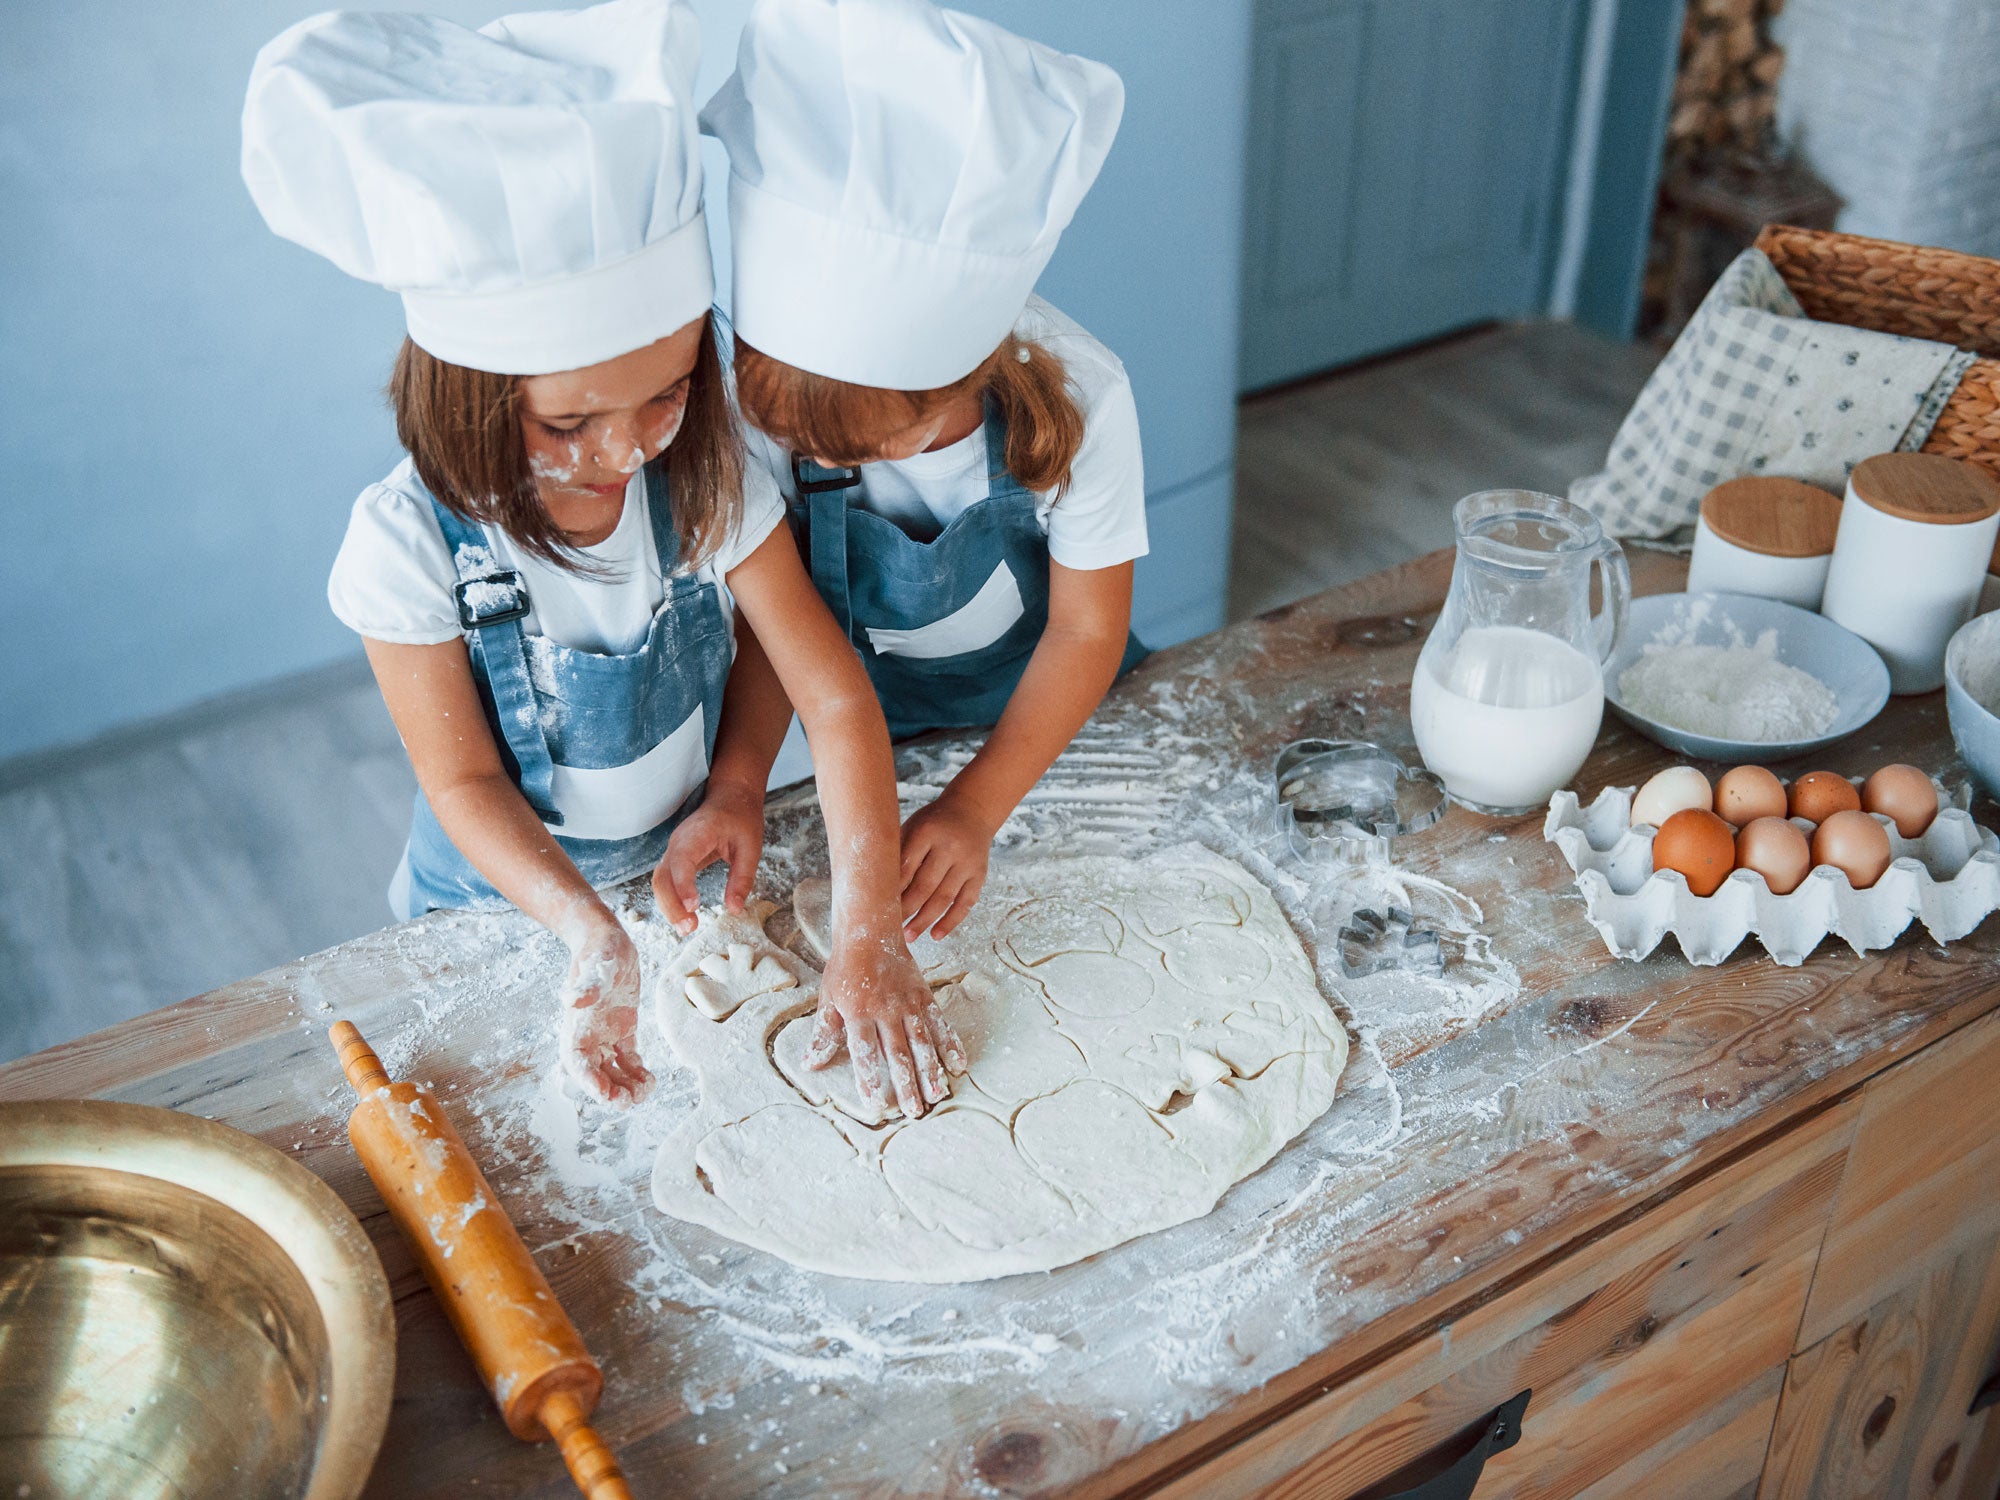 The importance of cooking with kids